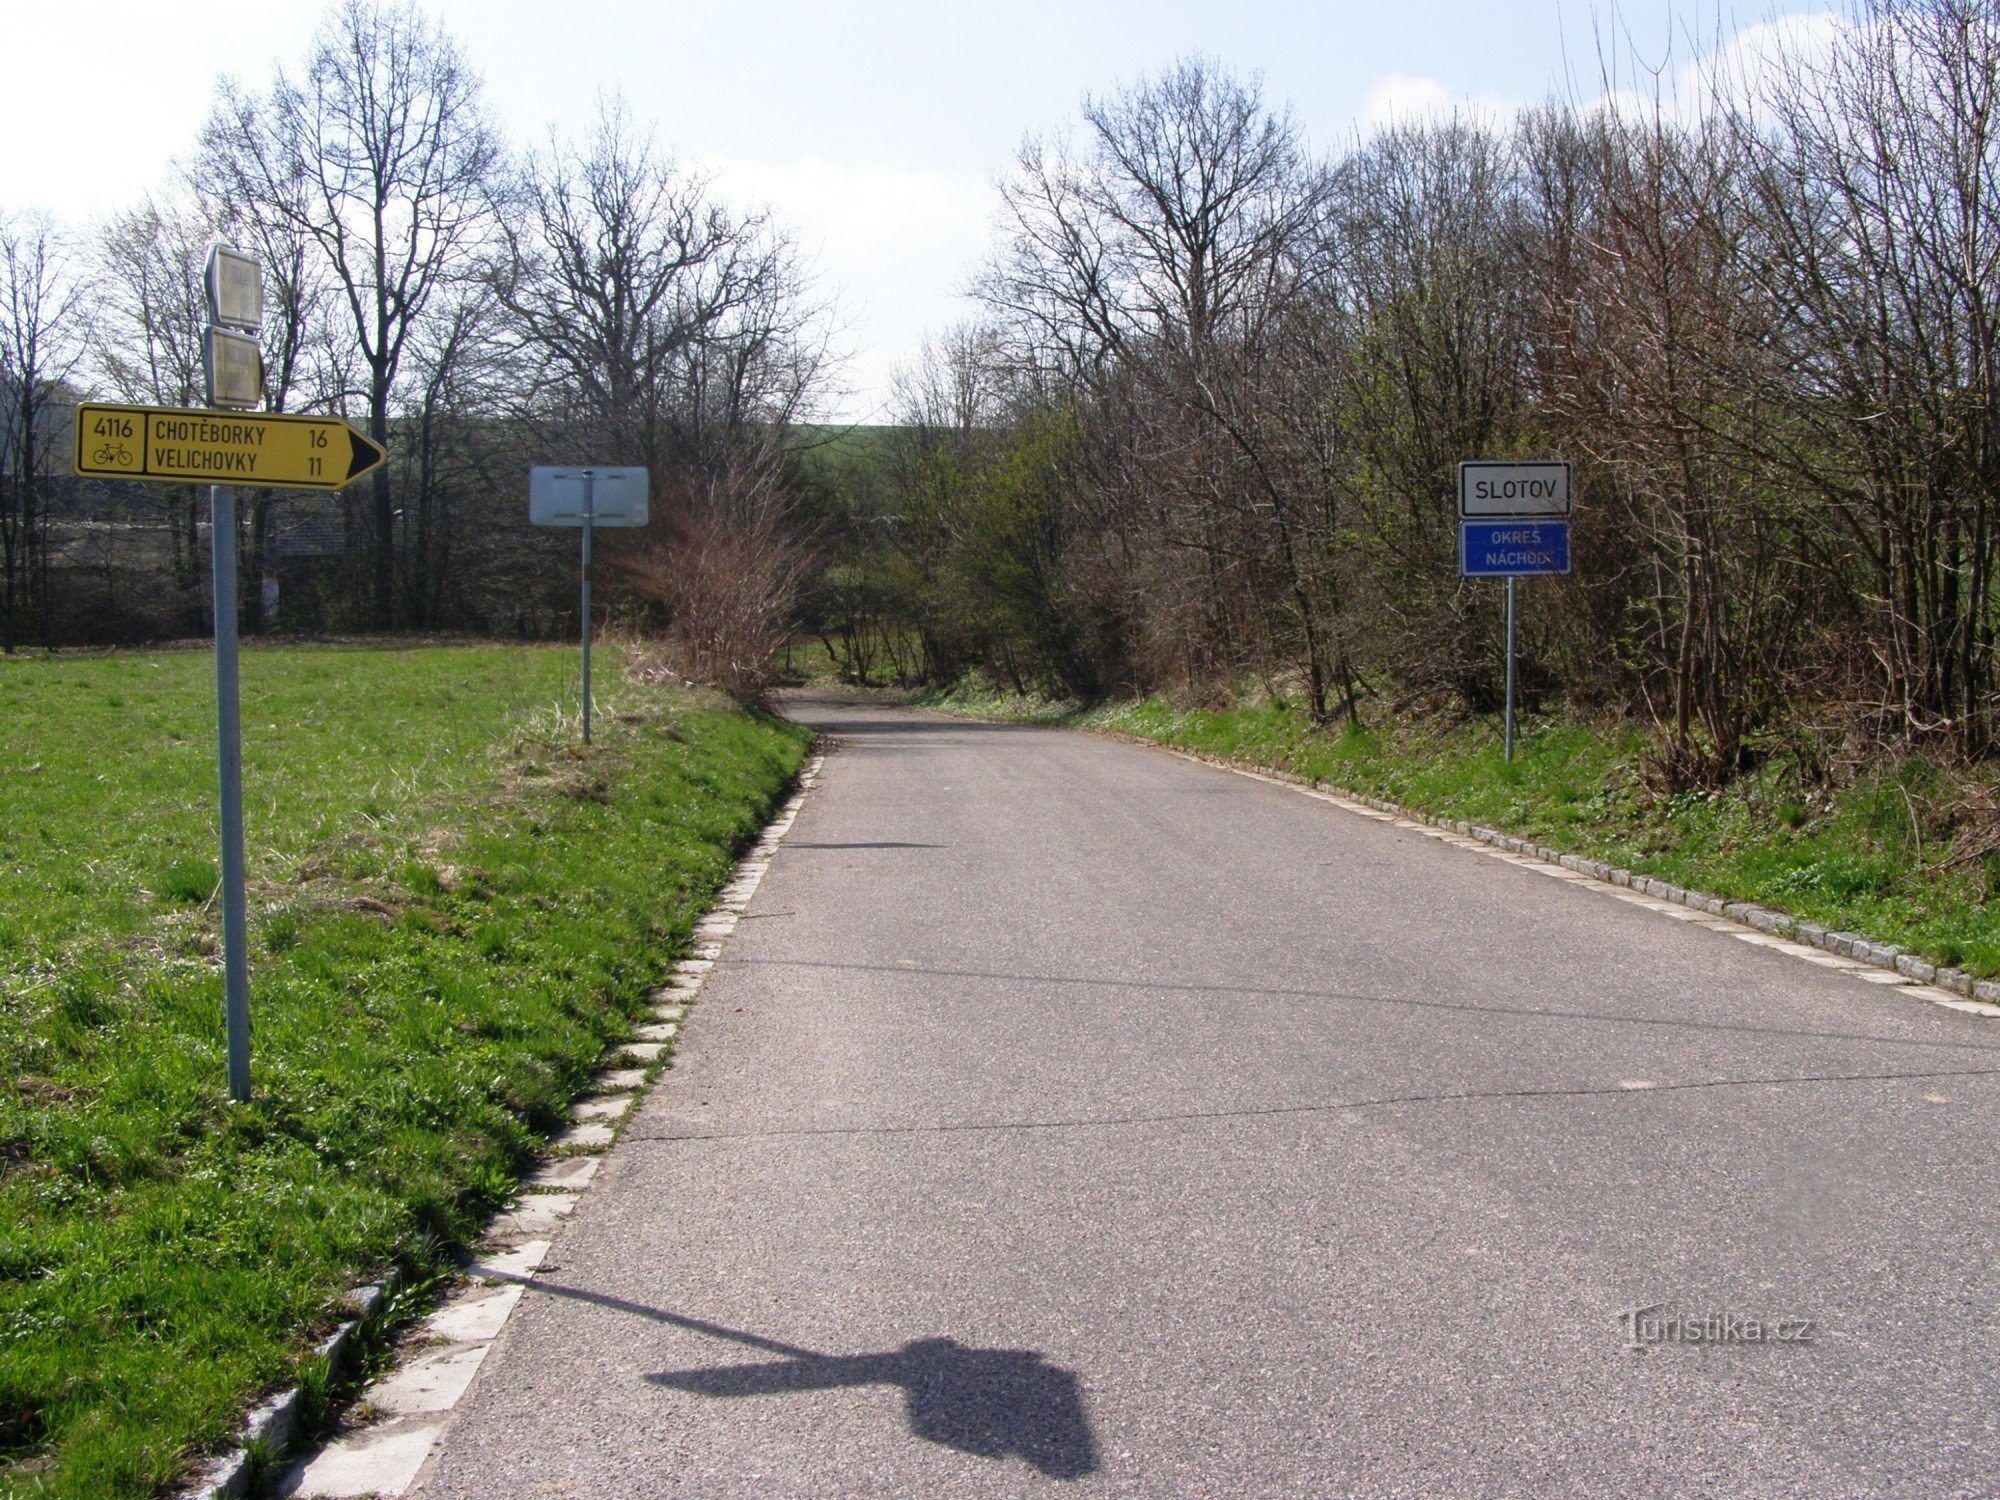 Kuks cycling junction, behind the hospital